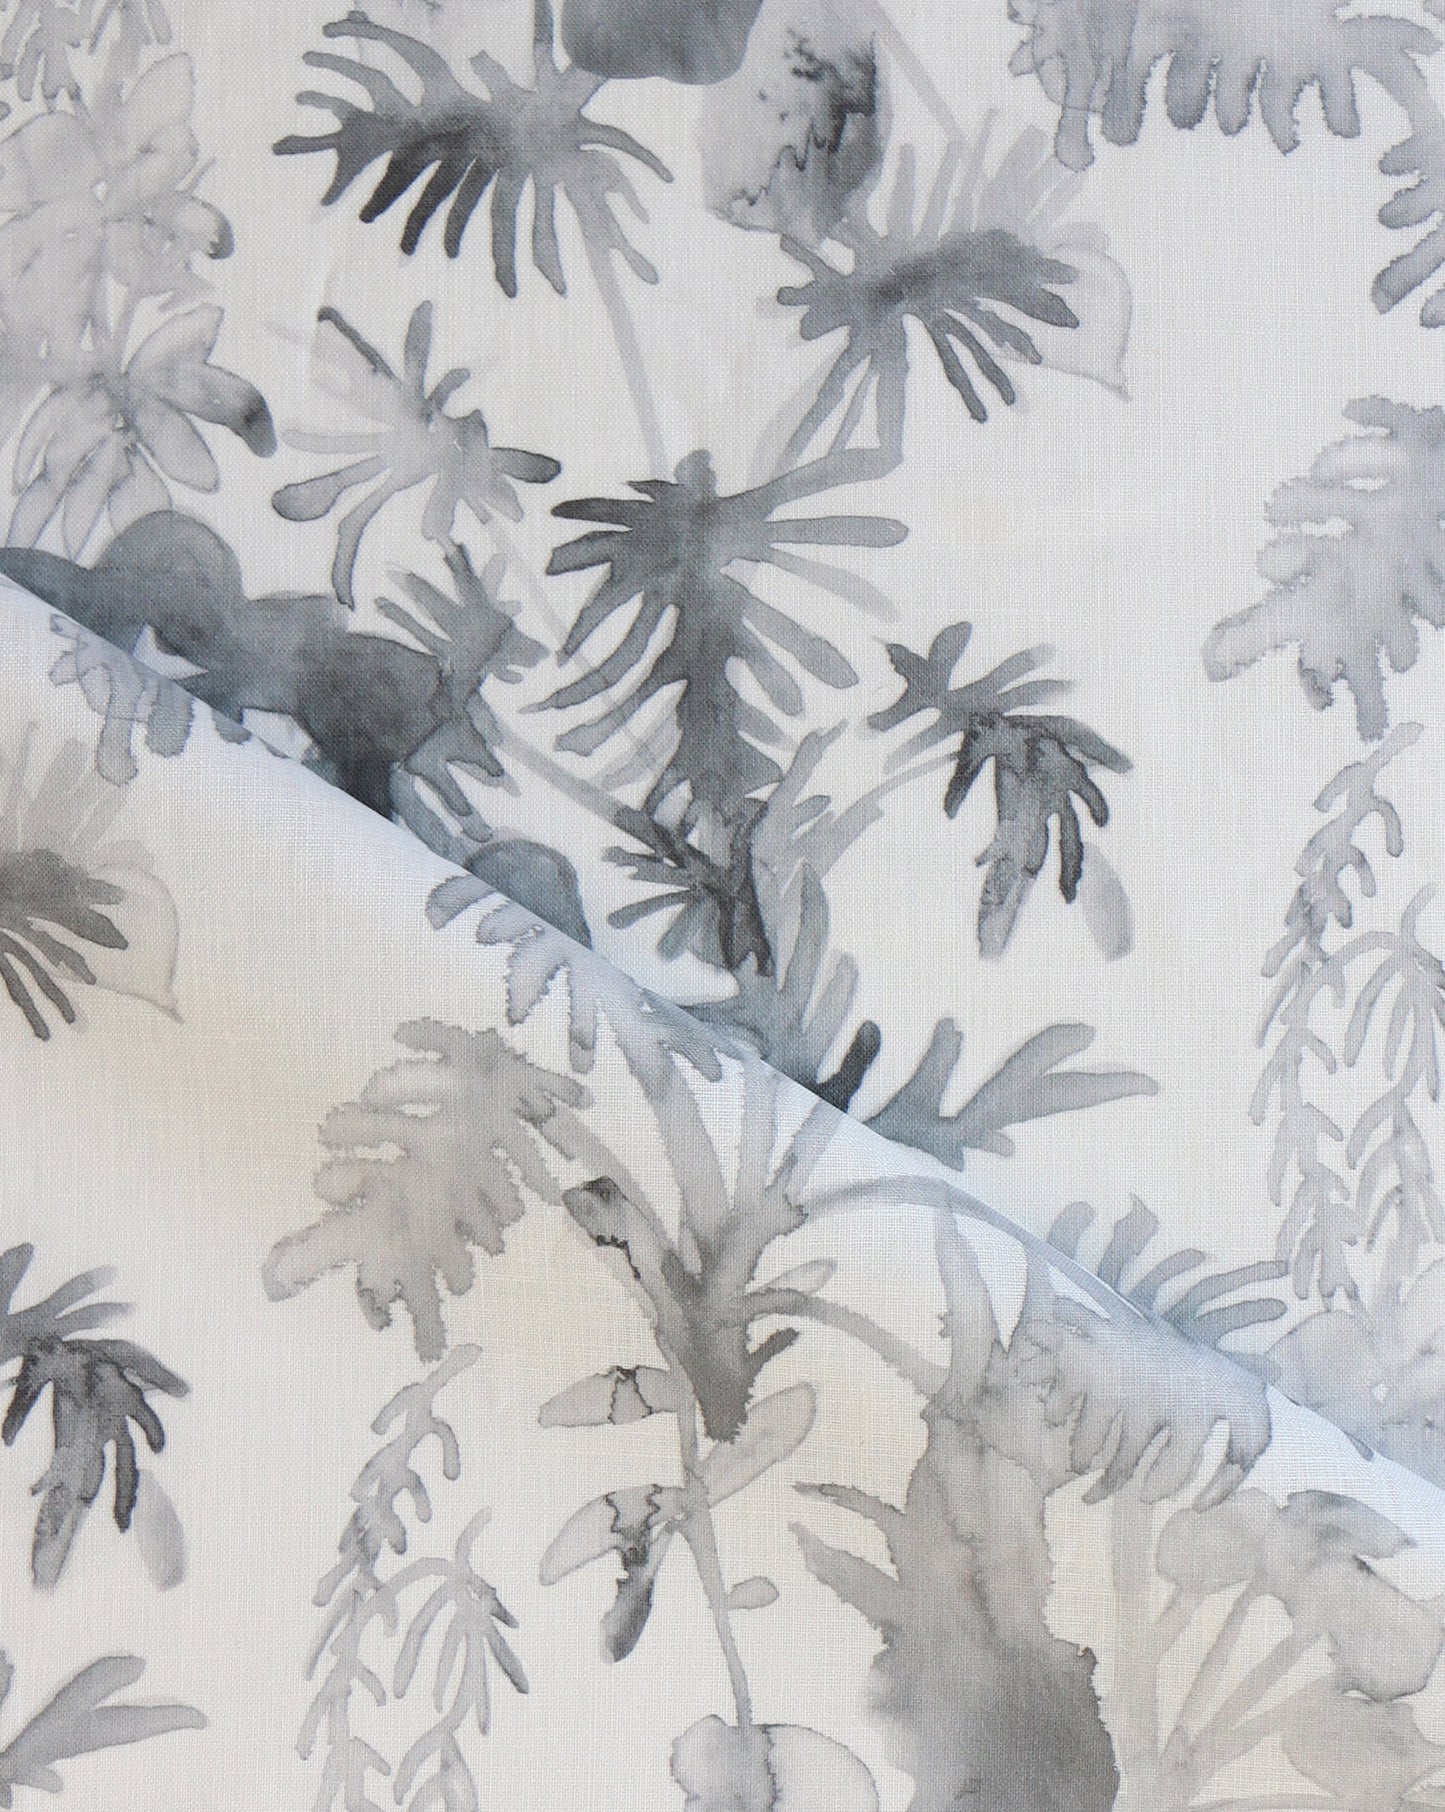 Inspired by the joy of the houseplant, Topiary custom fabric in Birch features shades of grey and black.